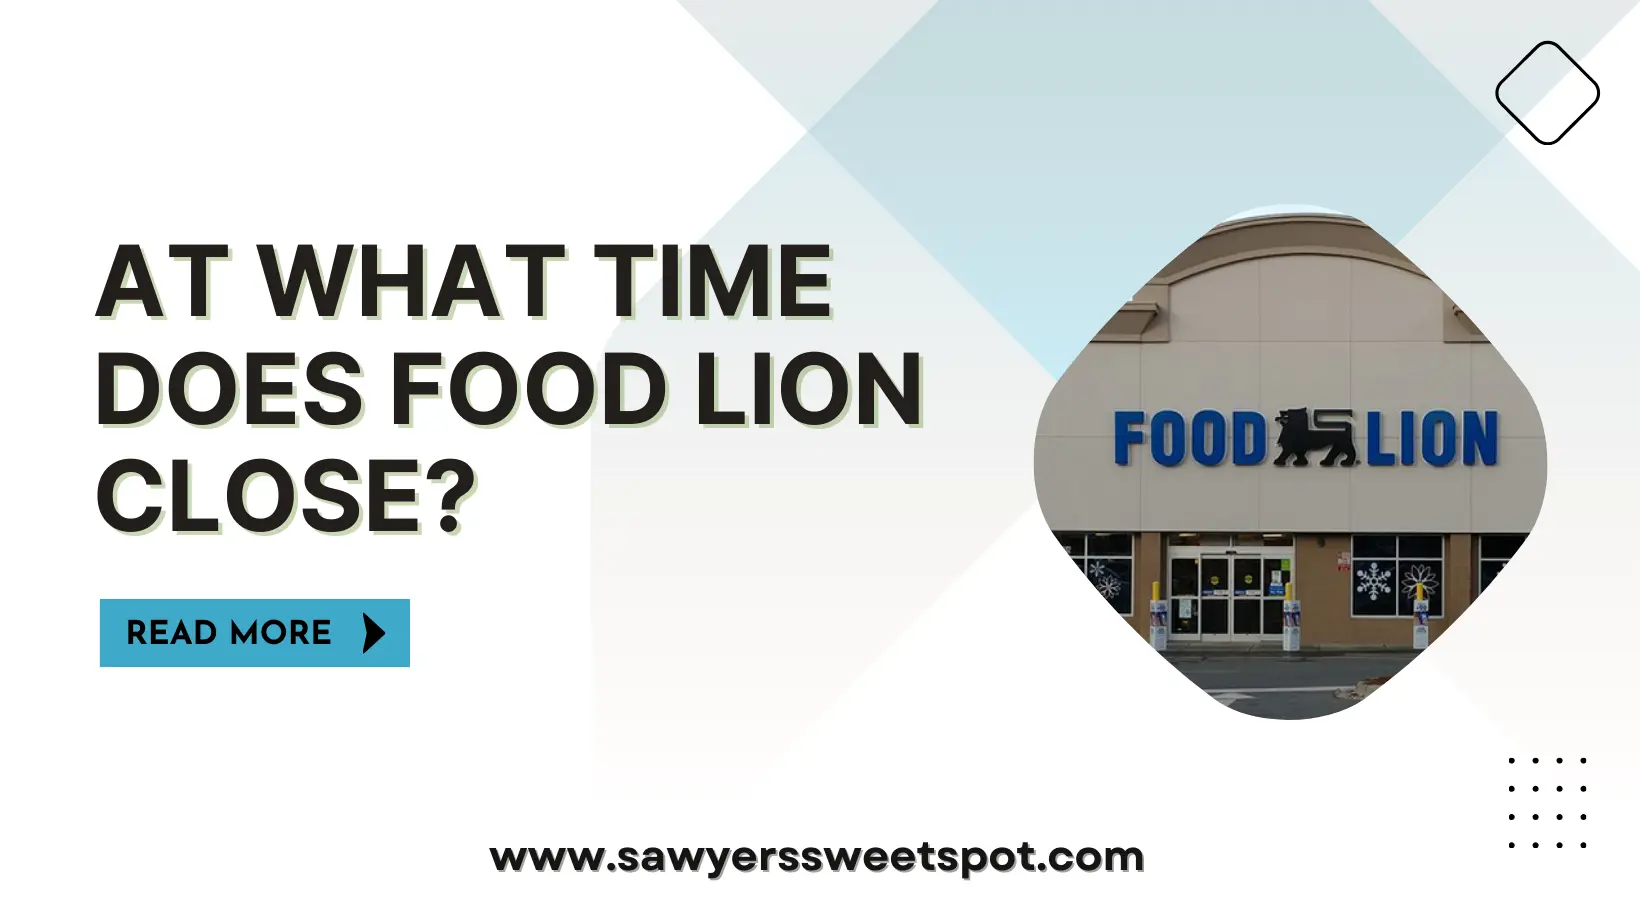 At What Time Does Food Lion Close?